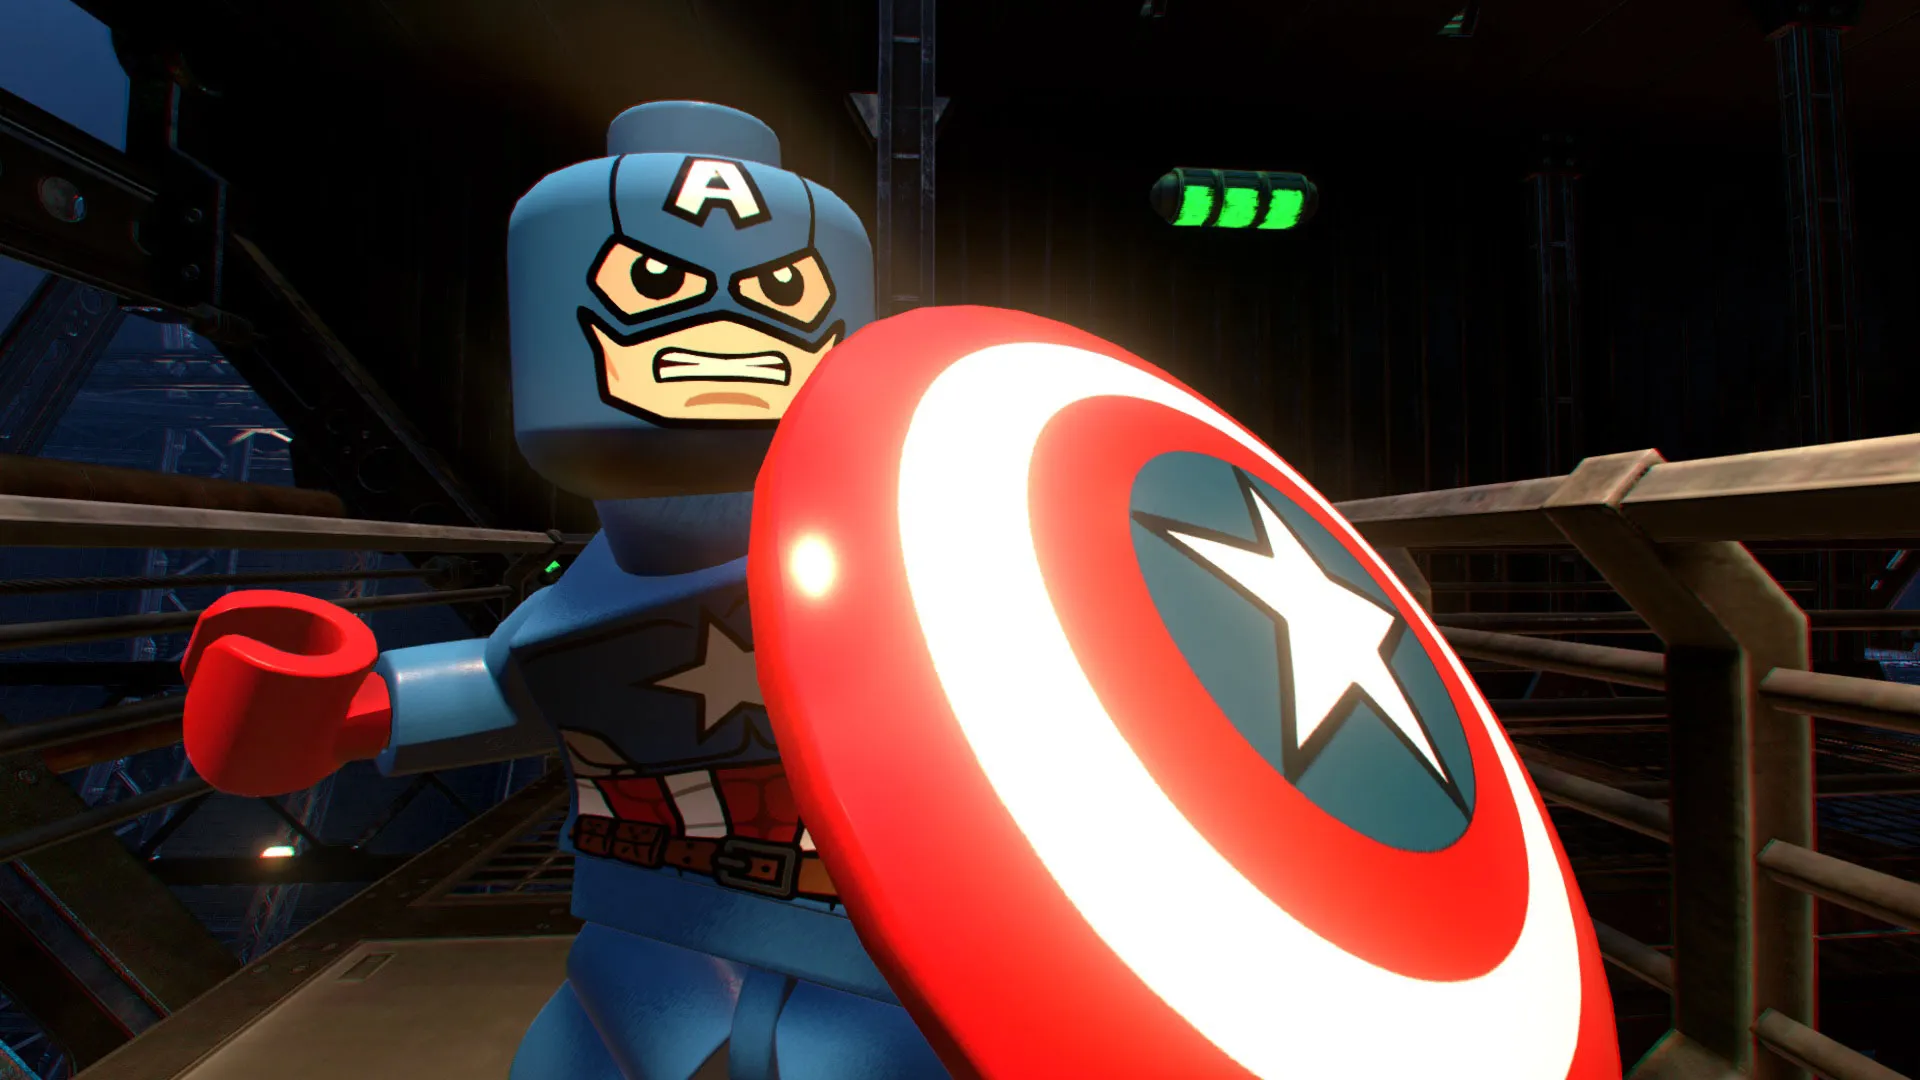 ‘Lego Marvel Avengers- Code Red’ to Arrive on Disney+ in October